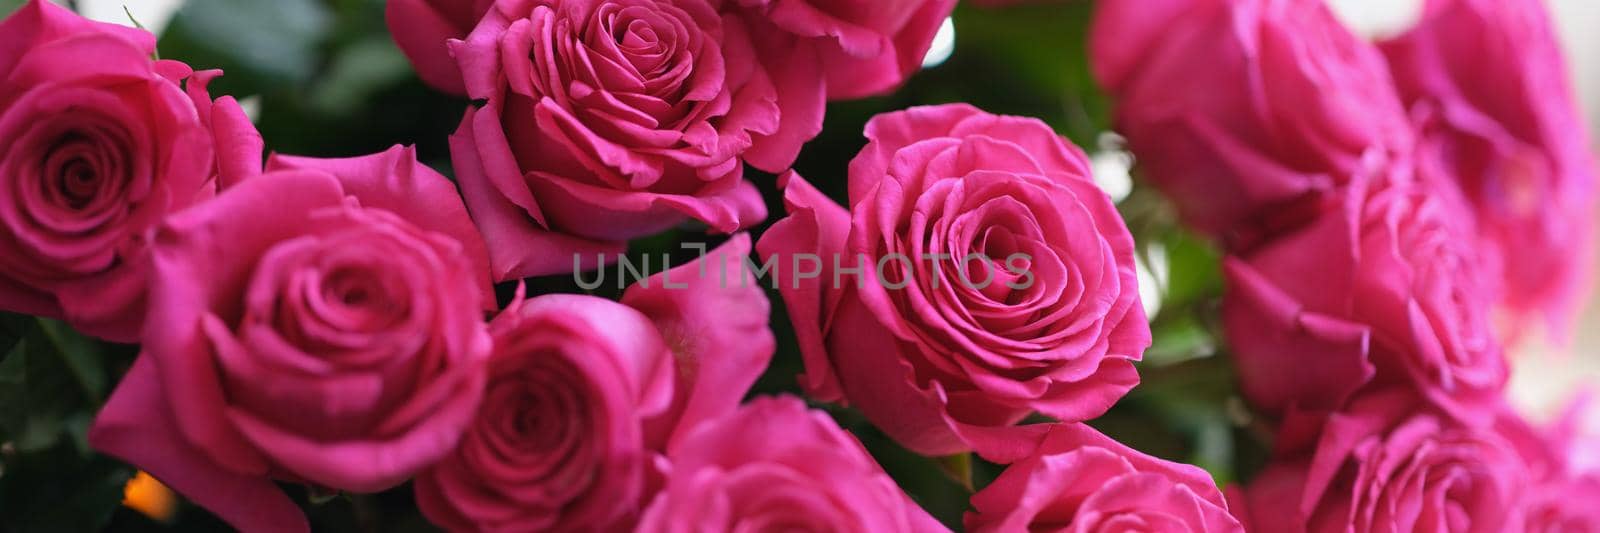 Beautiful fresh blooming bouquet of pink roses with green leaves by kuprevich